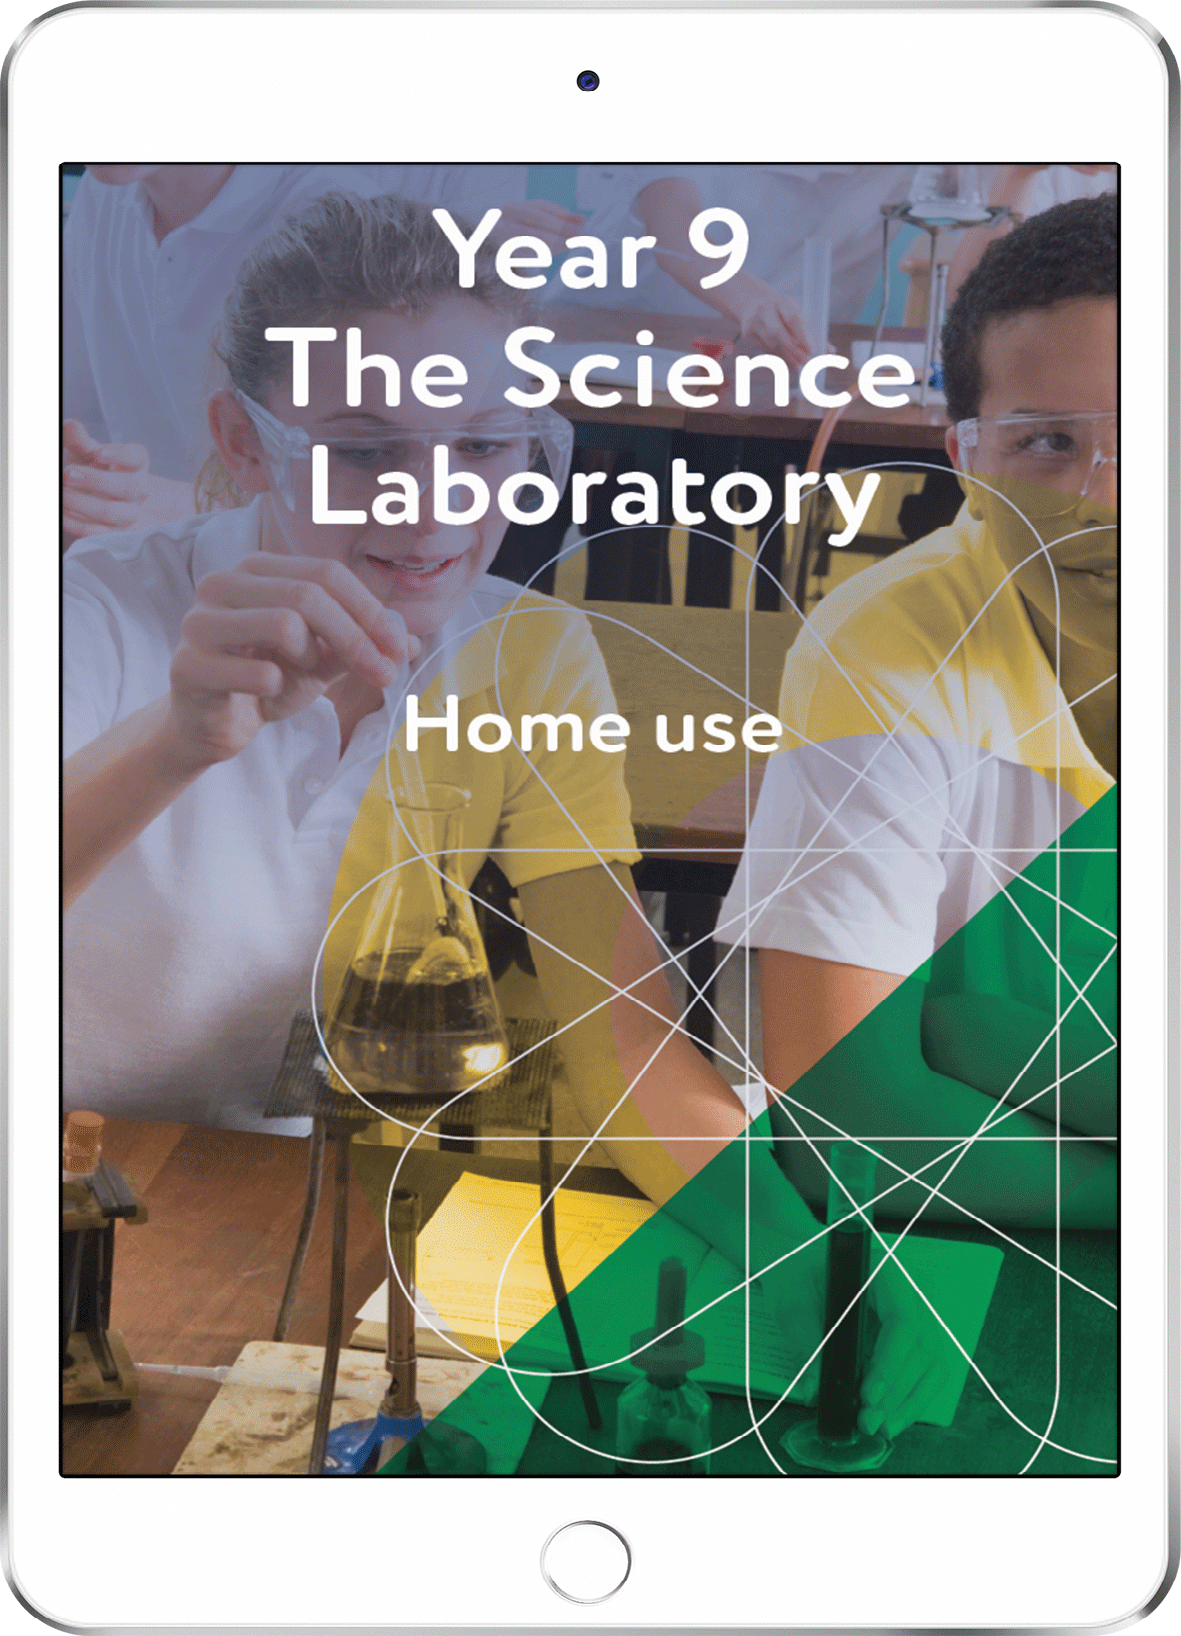 Year 9 The Science Laboratory - Home Use